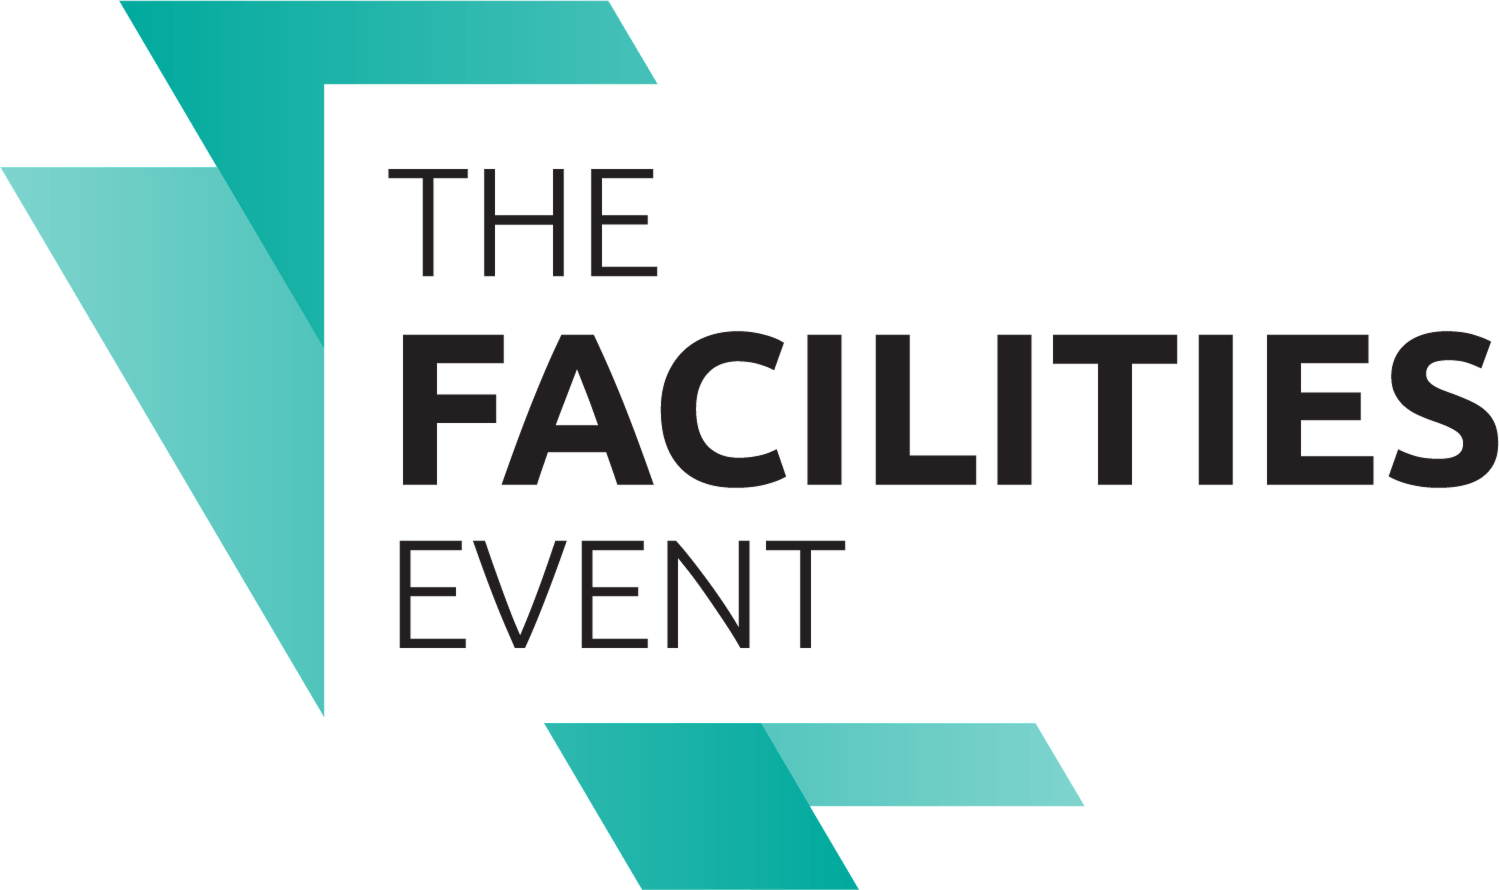 The Facilities Event